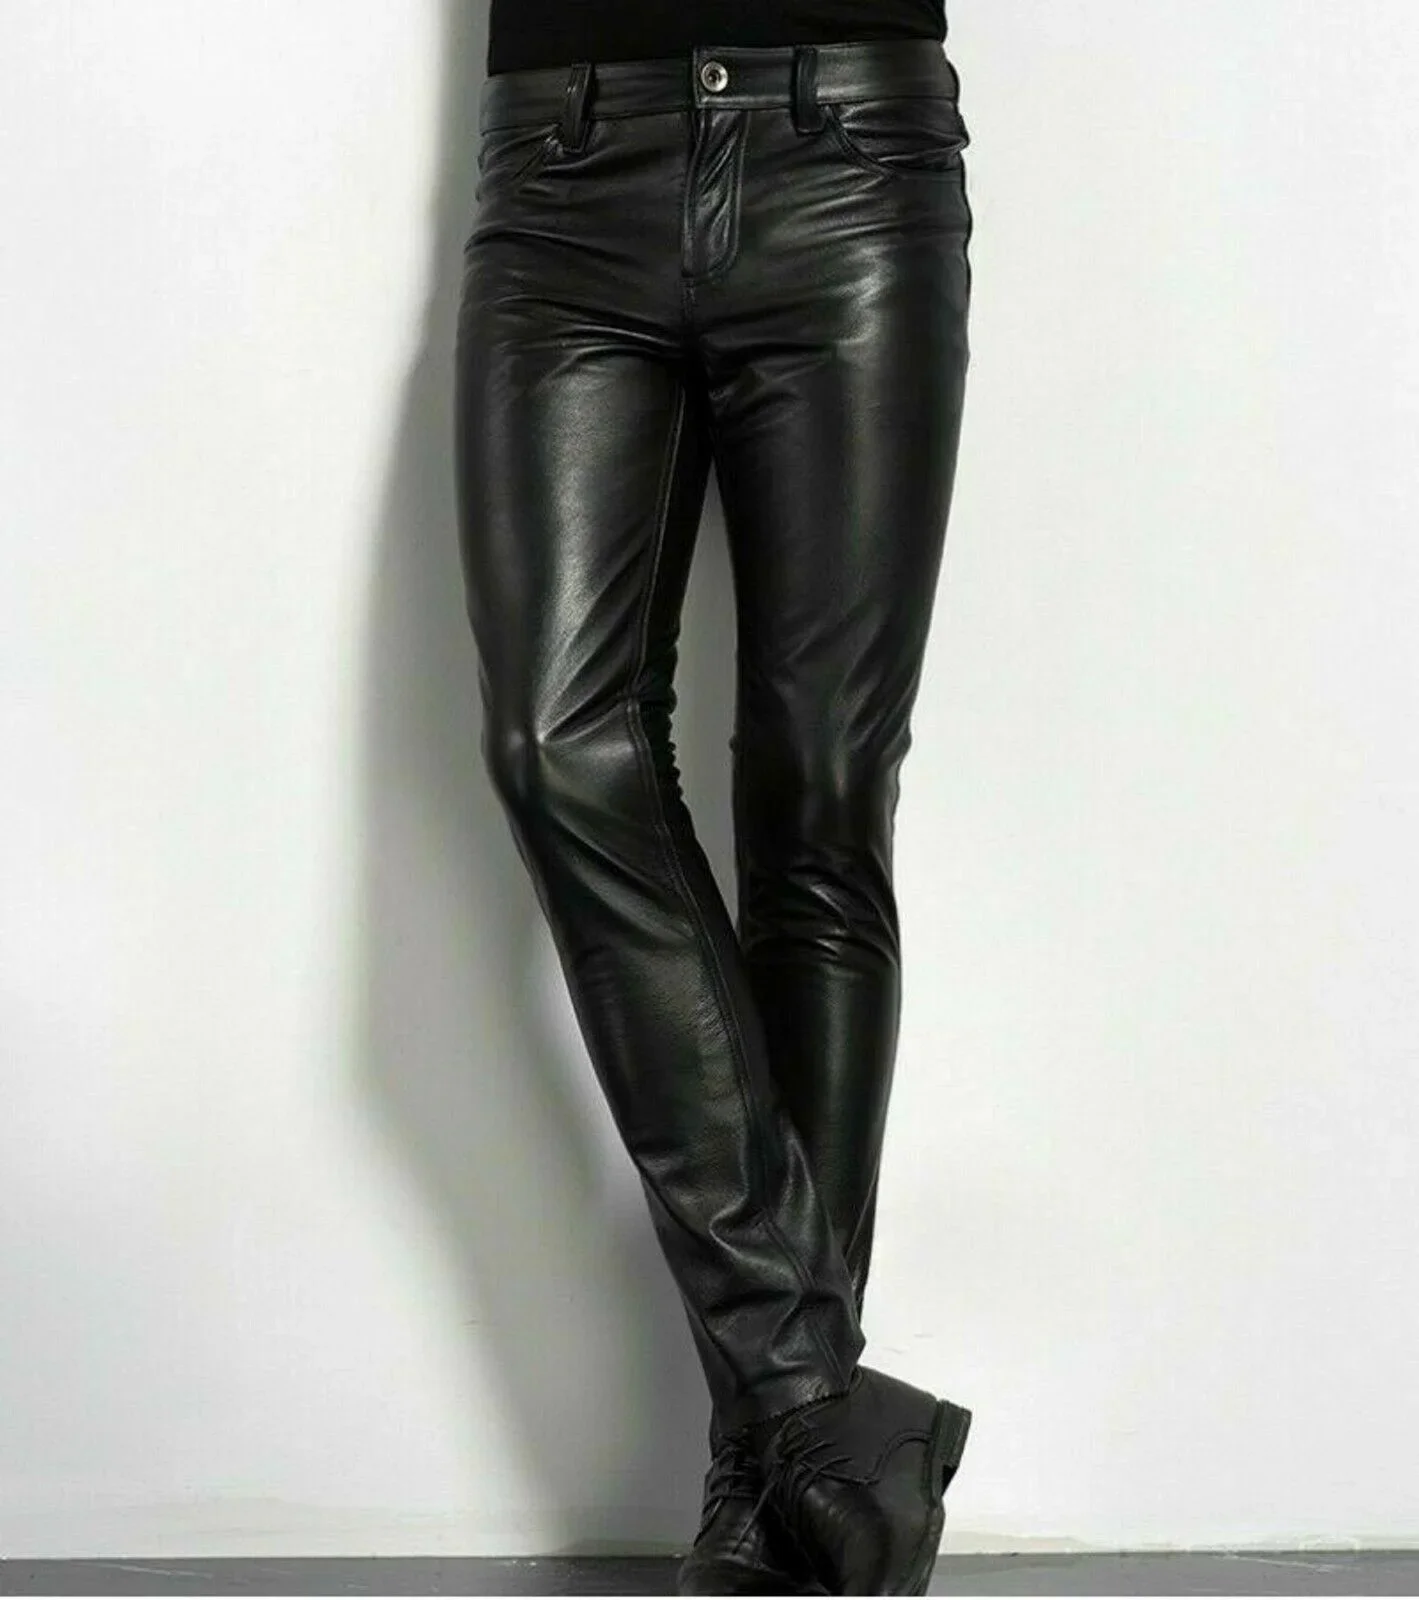 Spring Fashion Men's Fashion Rock Style PU Leather Pants Men's faux leather slim-fit motorcycle trousers 4